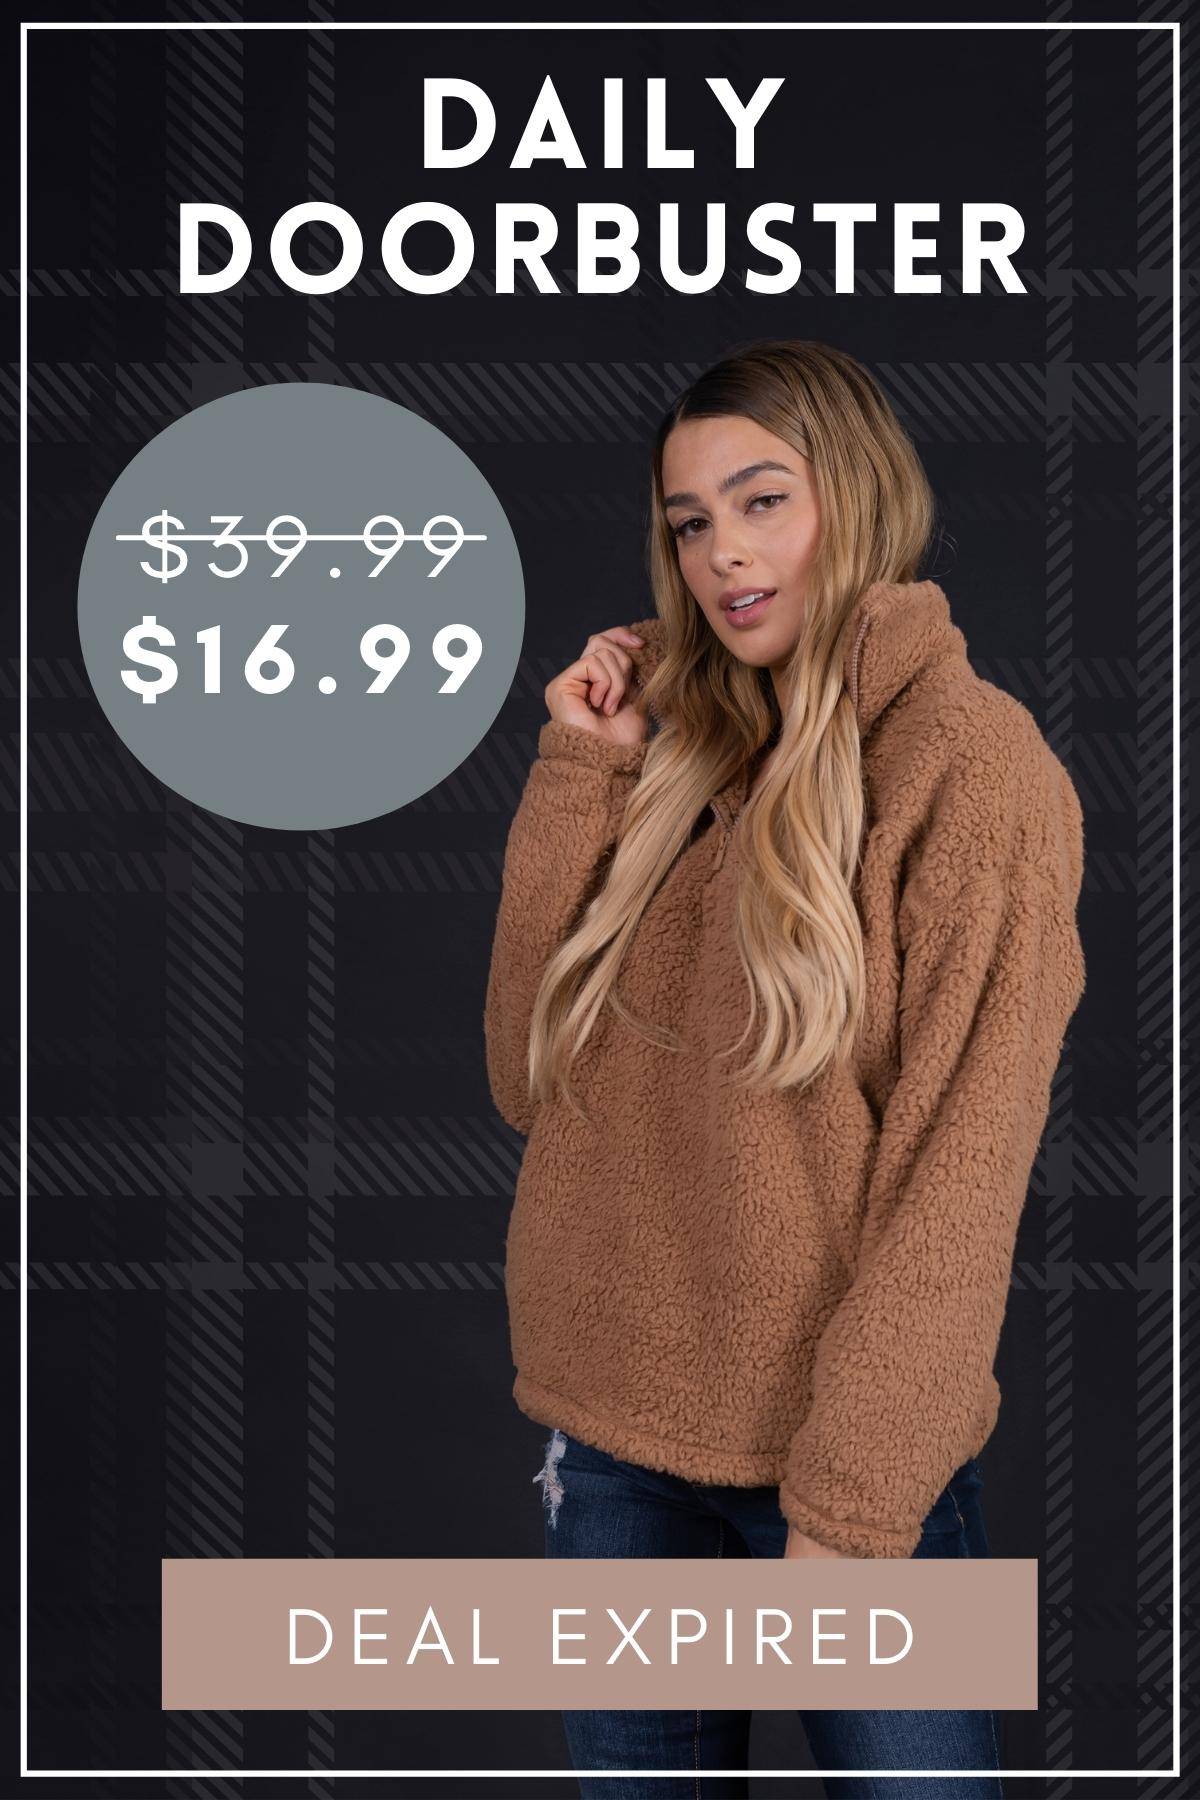 Doorbuster Expired: Totally Snuggable Sherpa